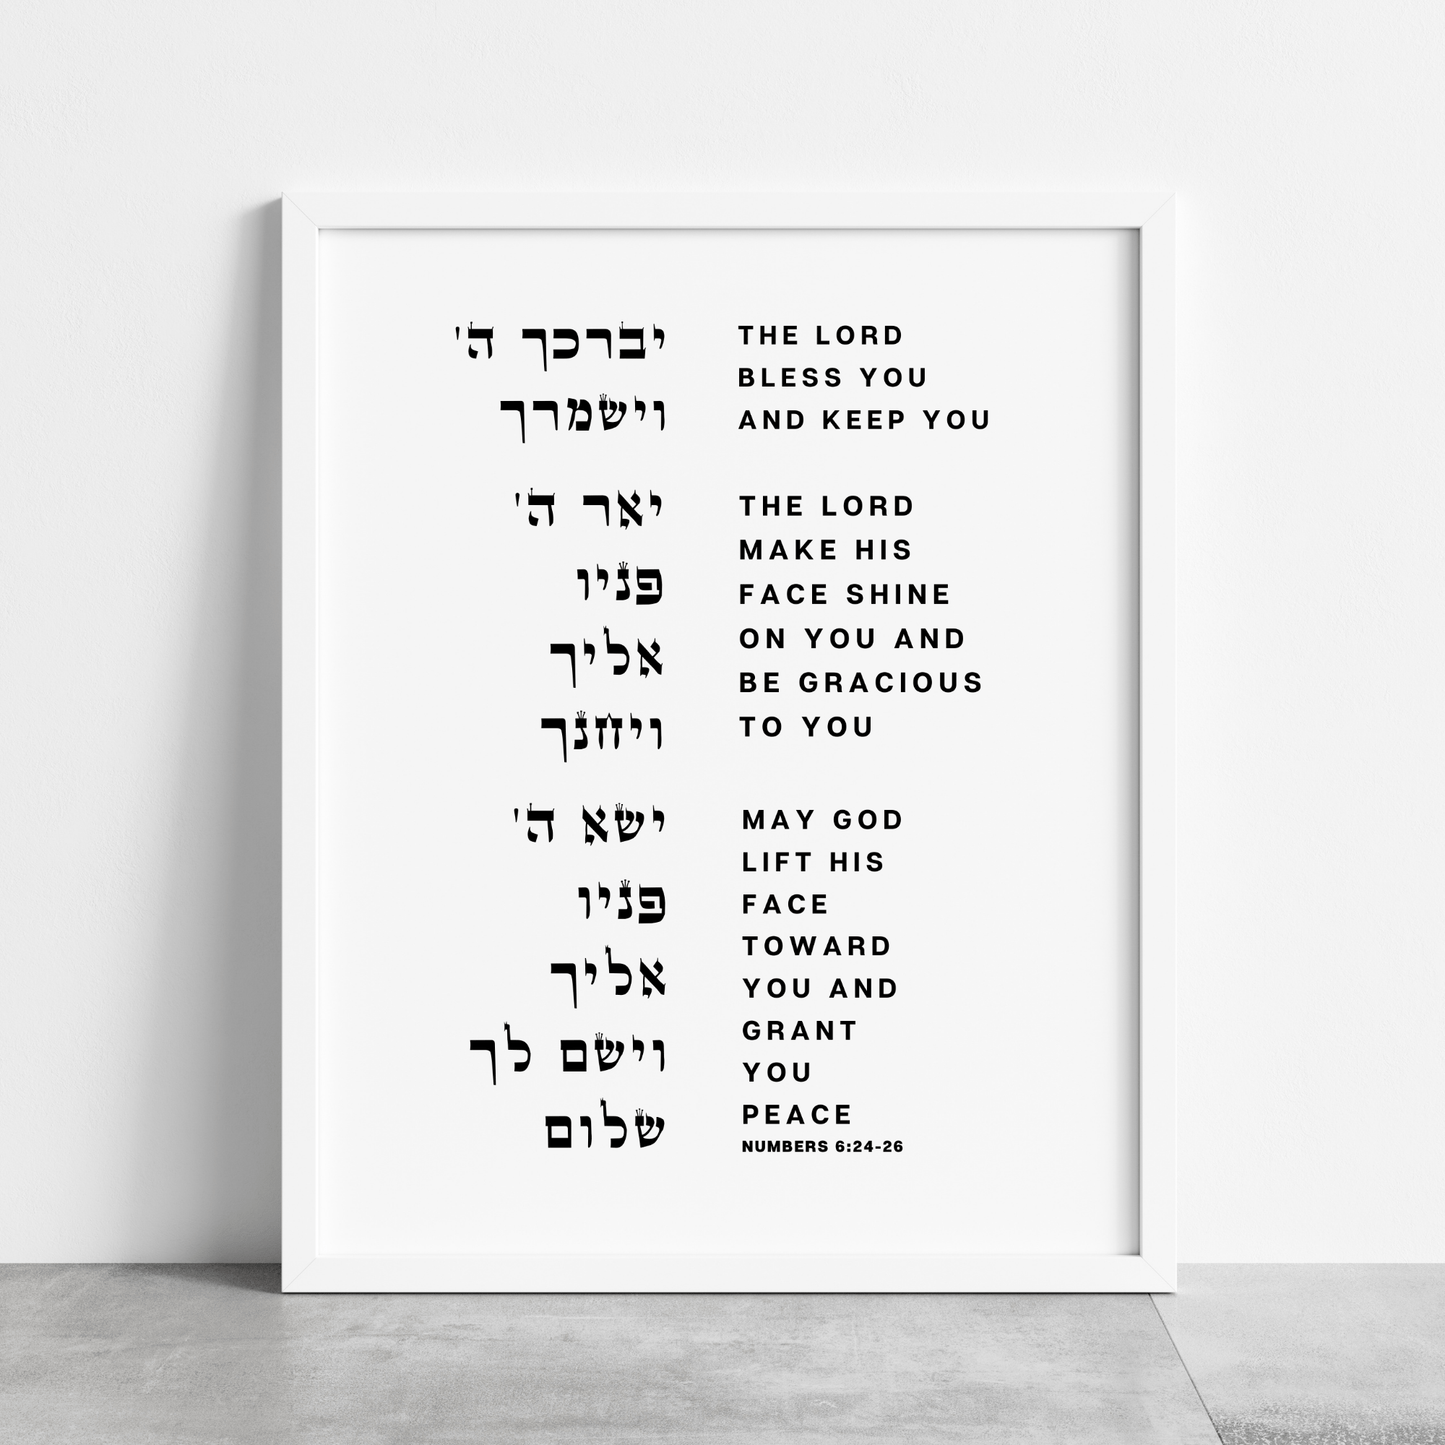 The Verse Priestly Blessing - The Lord Bless You and Keep You Priestly Blessing The Lord Bless You and Keep You Bible Verse Wall Art